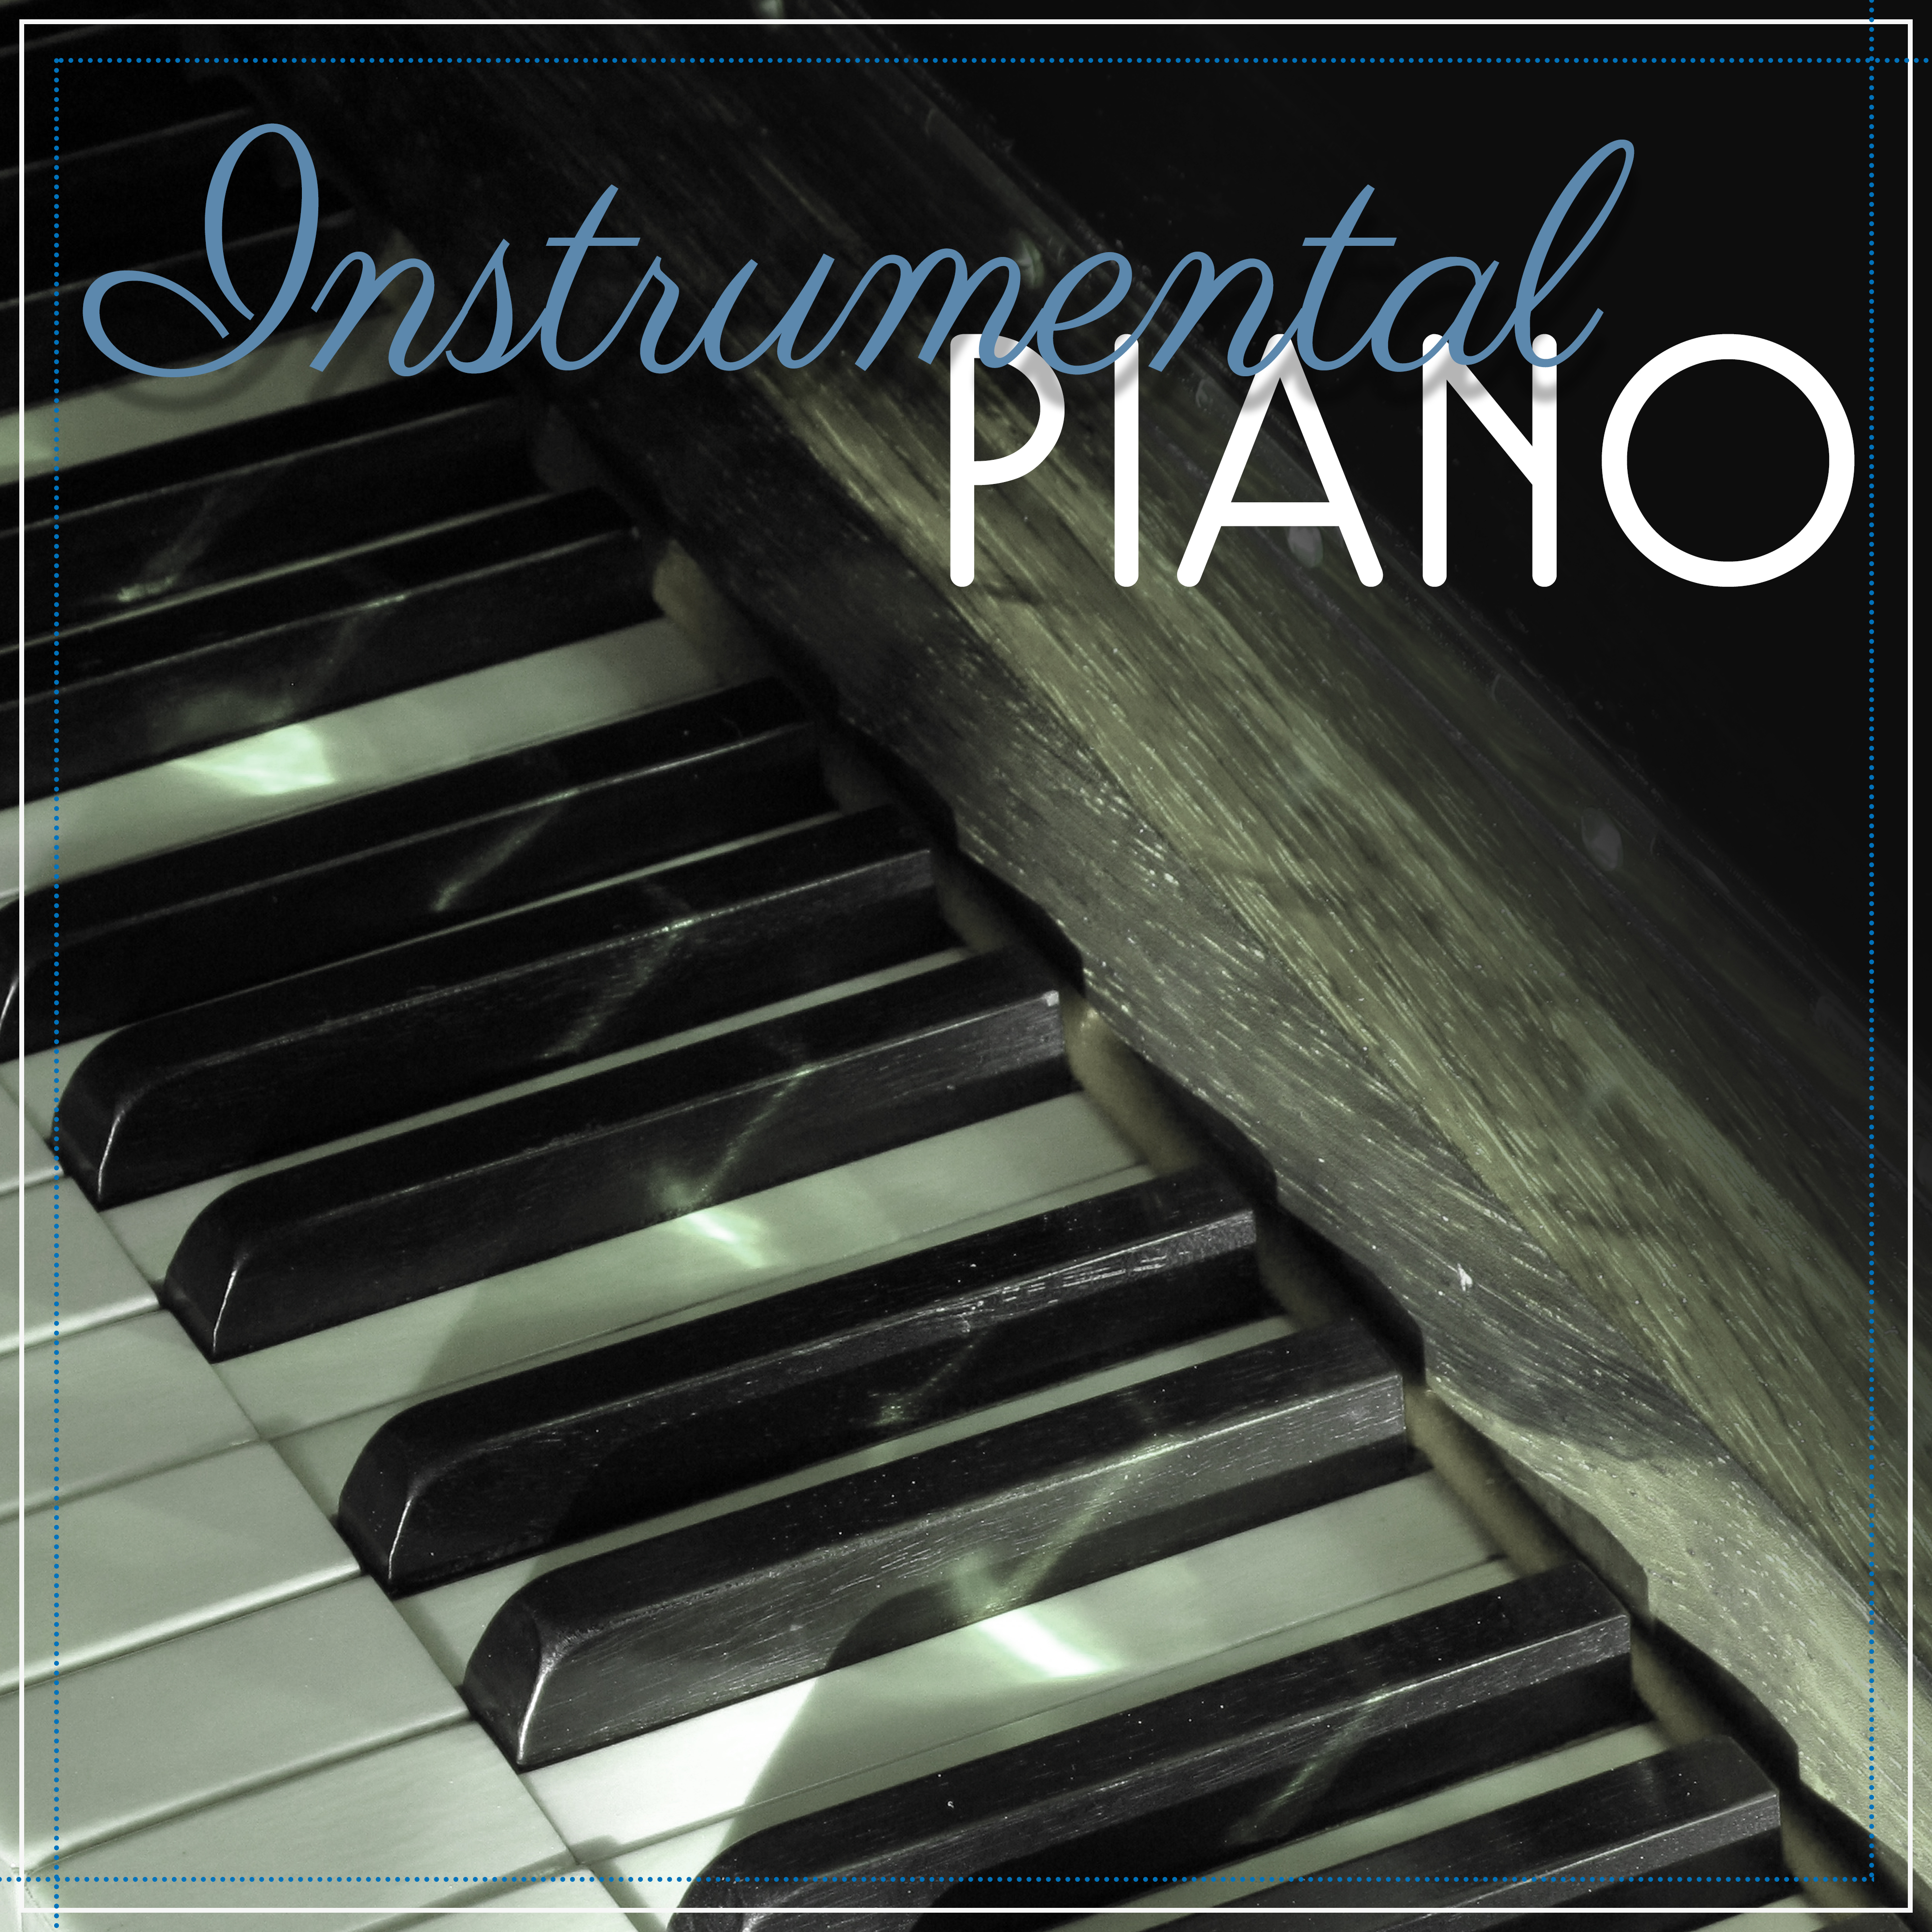 Instrumental Piano  Classical Music for Relaxation, Calming Sounds, Deep Rest, Franz Joseph Haydn